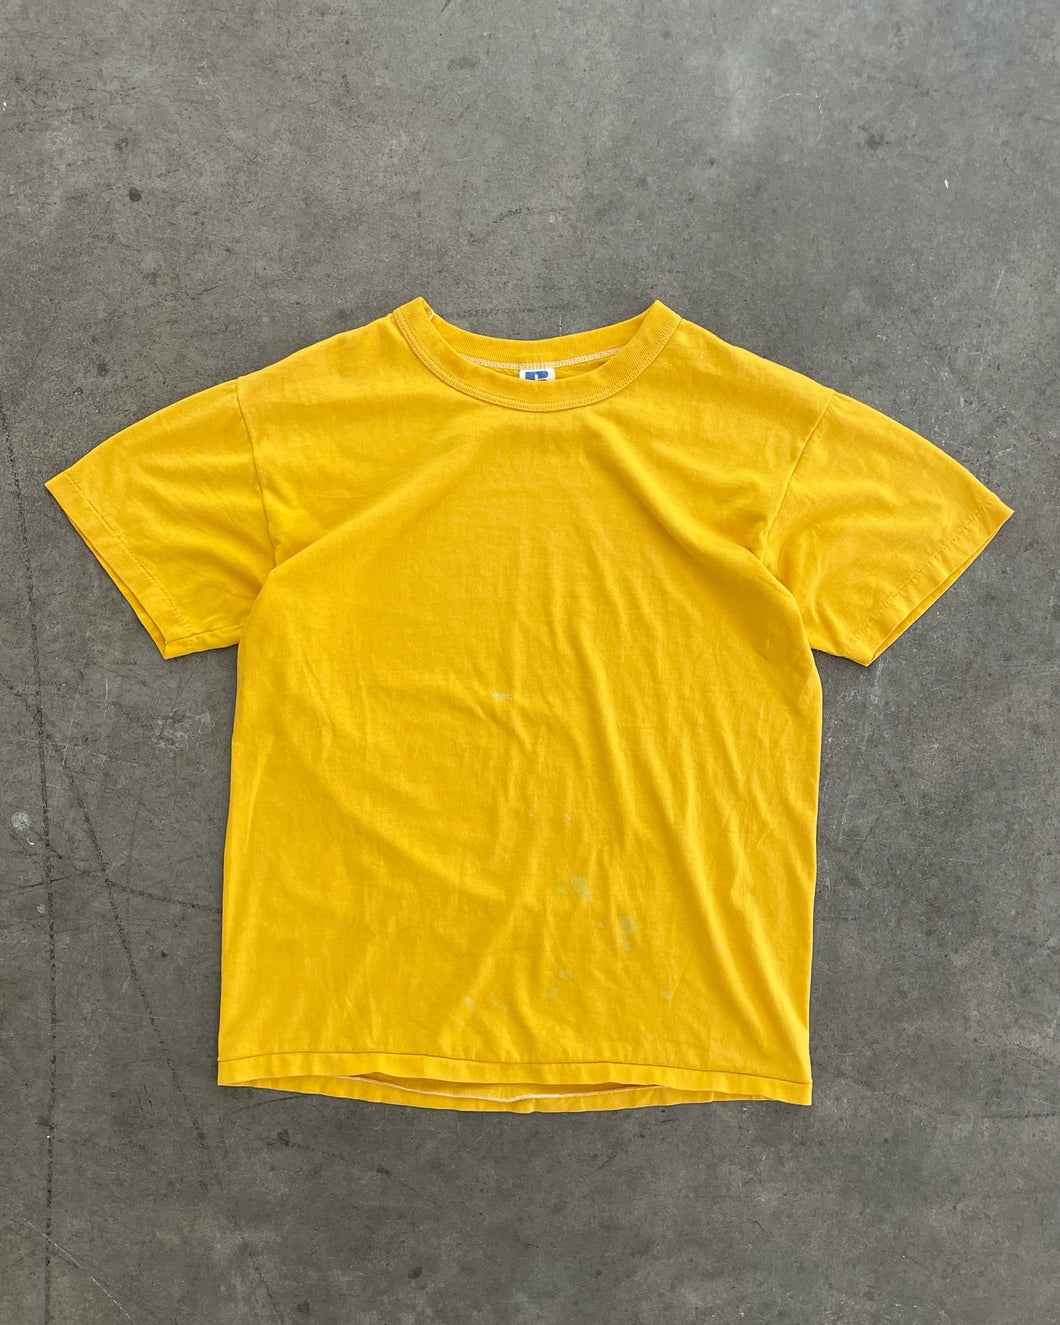 SINGLE STITCHED FADED YELLOW RUSSELL TEE - 1980S